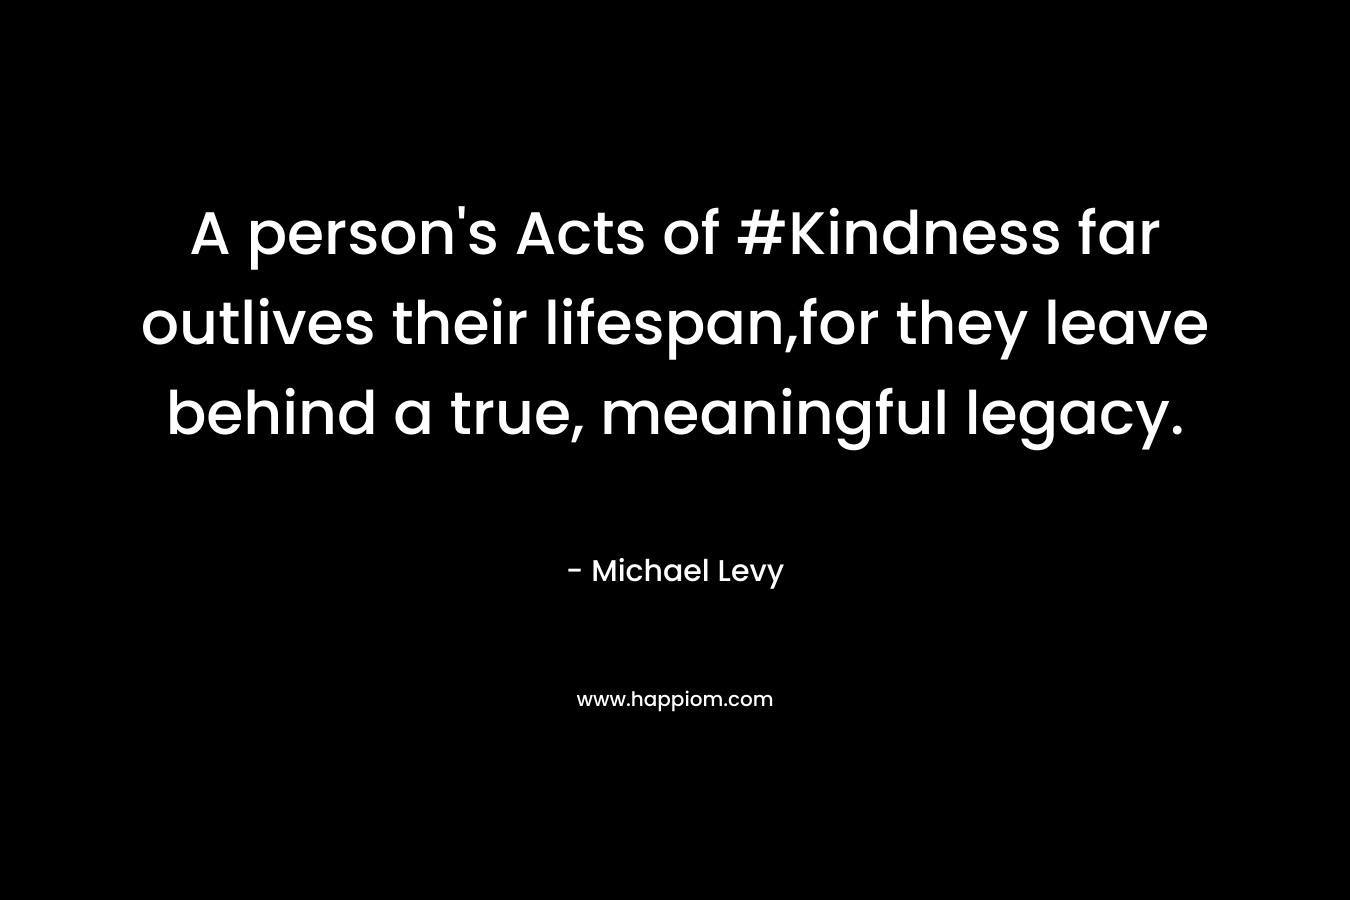 A person’s Acts of #Kindness far outlives their lifespan,for they leave behind a true, meaningful legacy. – Michael Levy